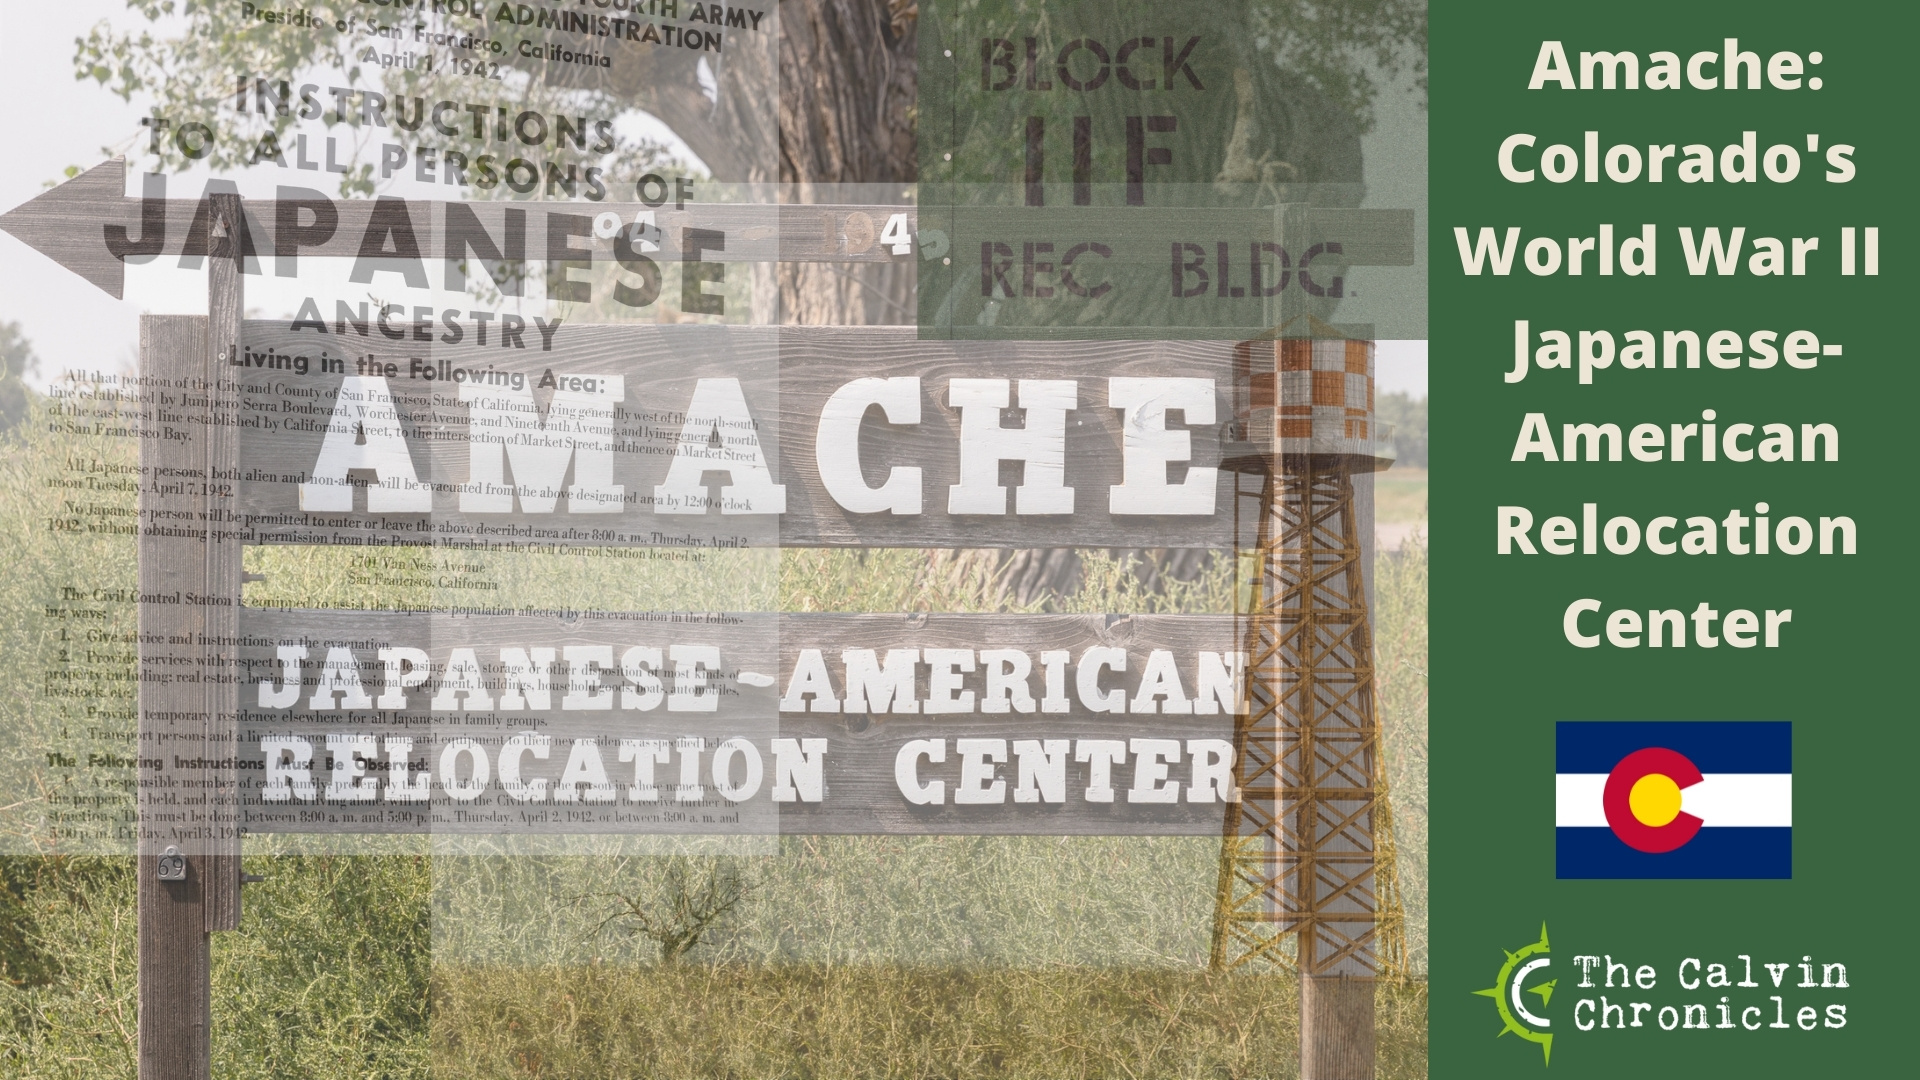 You are currently viewing Amache: Colorado’s World War II Japanese-American Relocation Center